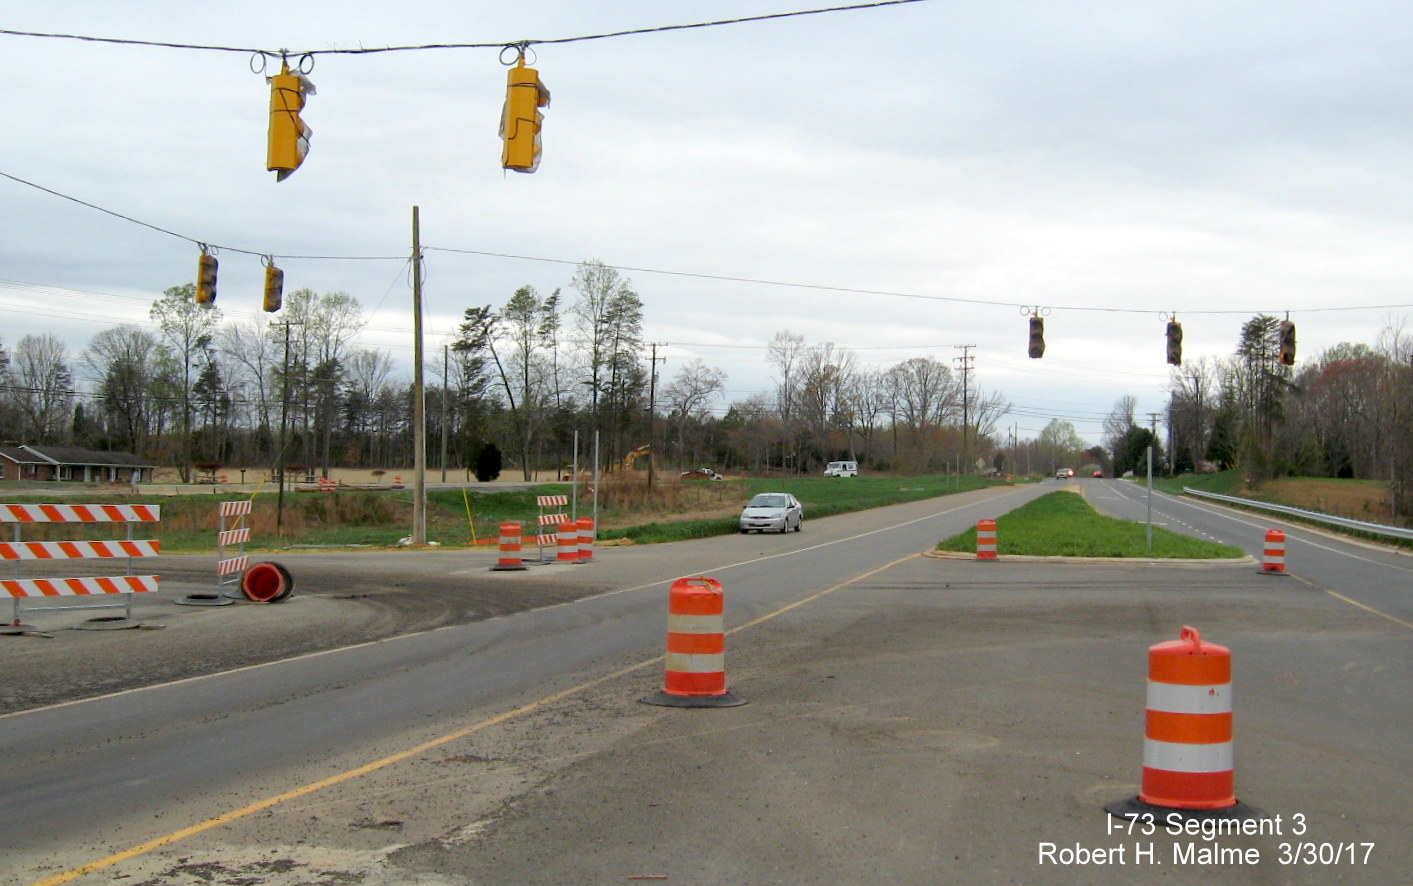 Image taken of view west along NC 150 bridge over future I-73 lanes under construction in Summerfield, Guilford County